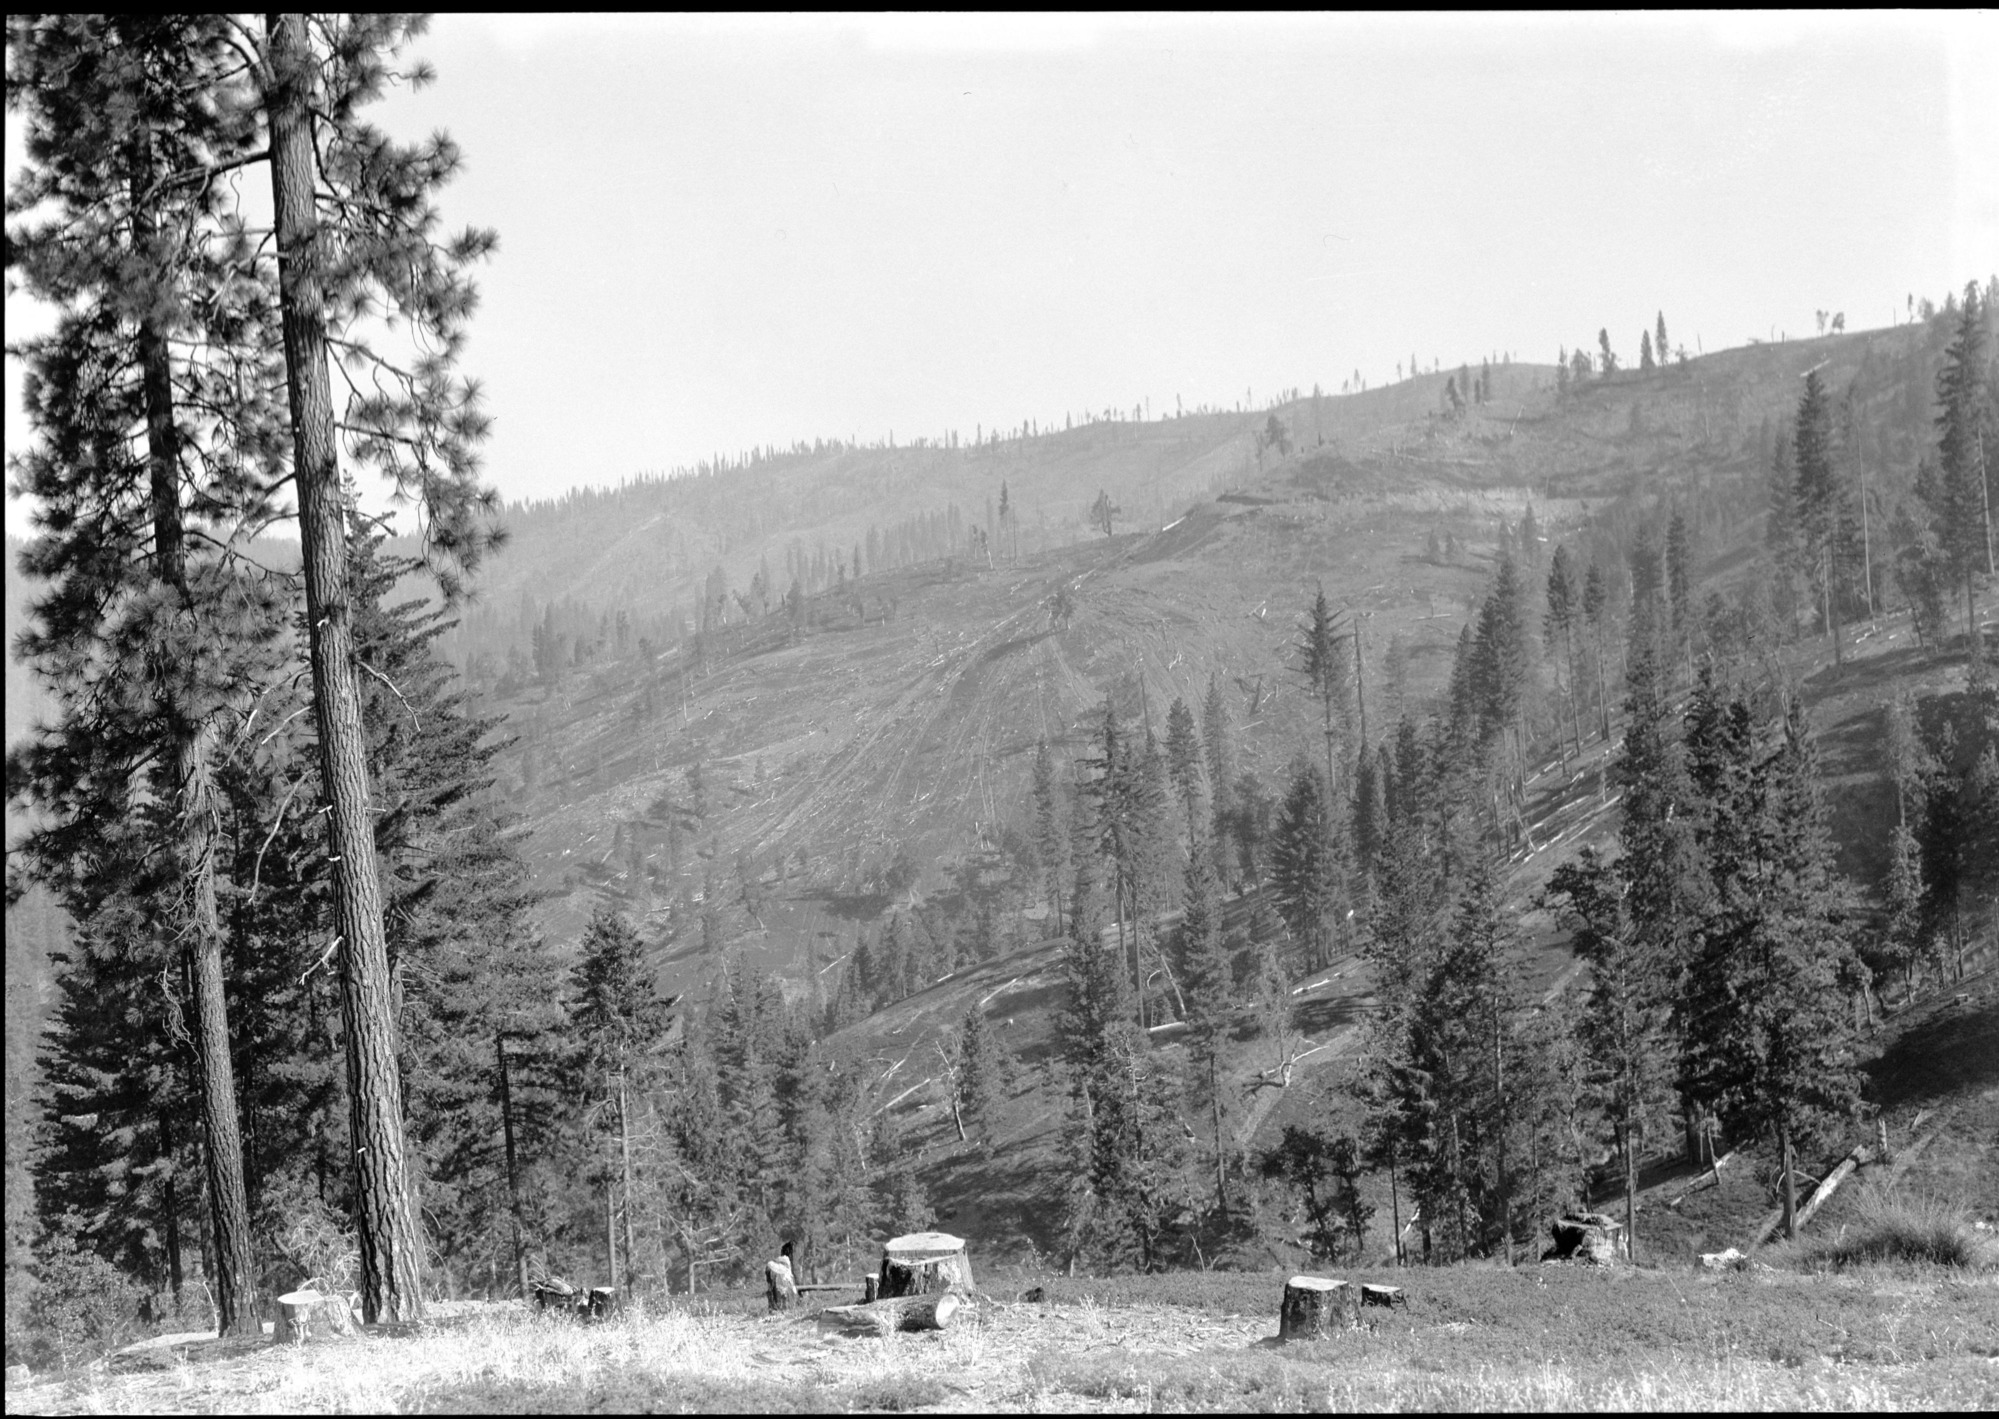 Yosemite Lumber Co. timber sale area cut under Forest Service methods in foreground. Y.L. Co. lands east, cut clean in distance.